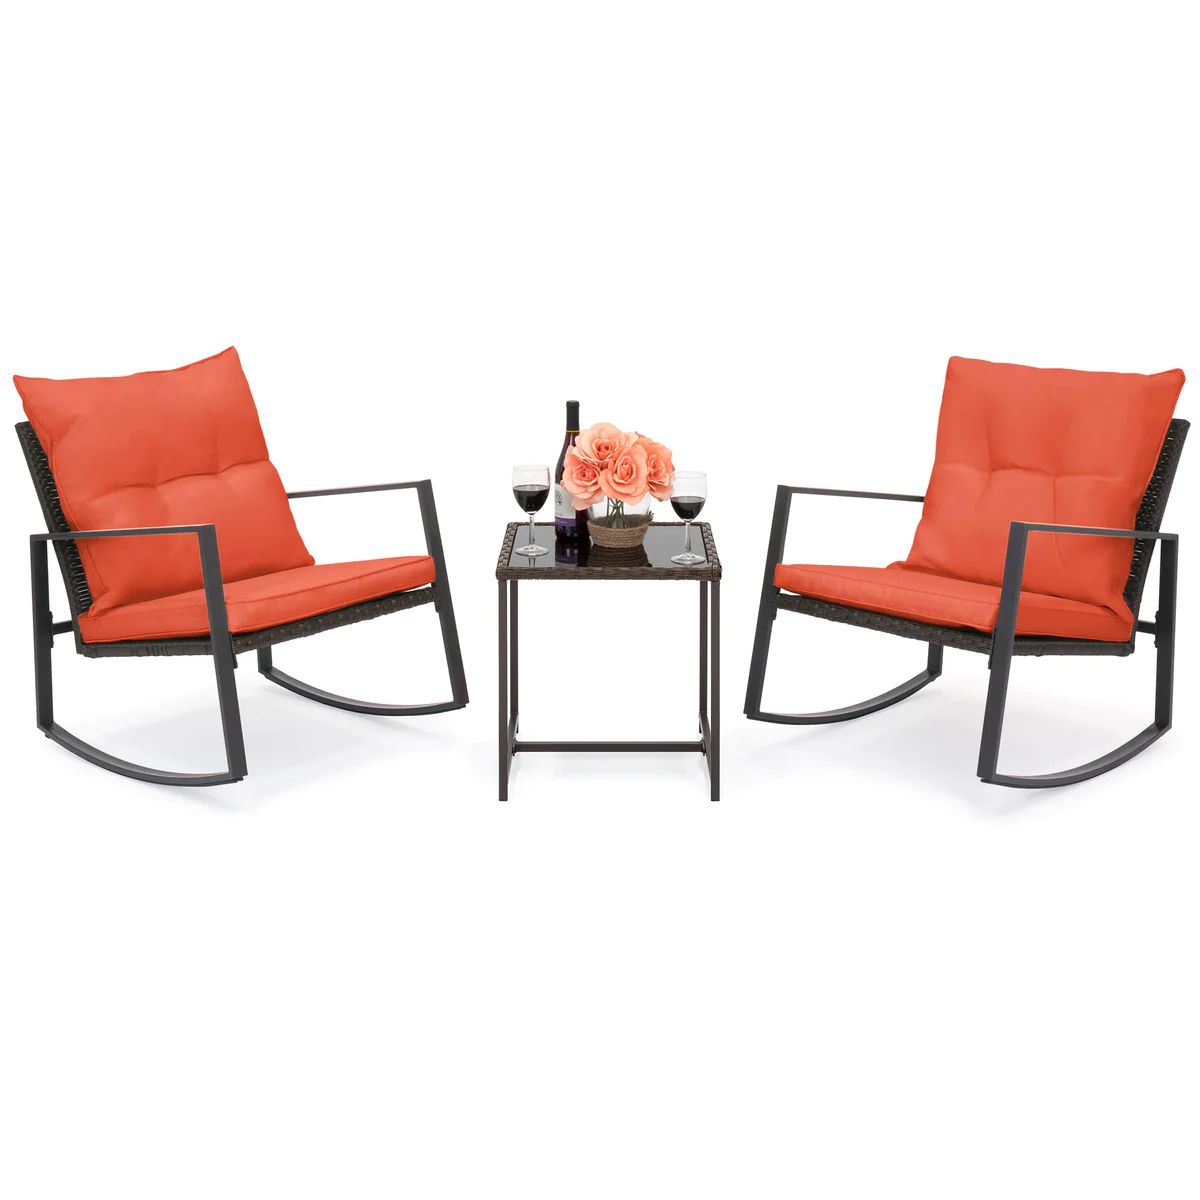 3-Piece Wicker Bistro Furniture Set w/ 2 Rocking Chairs, Glass Side Table | Best Choice Products 